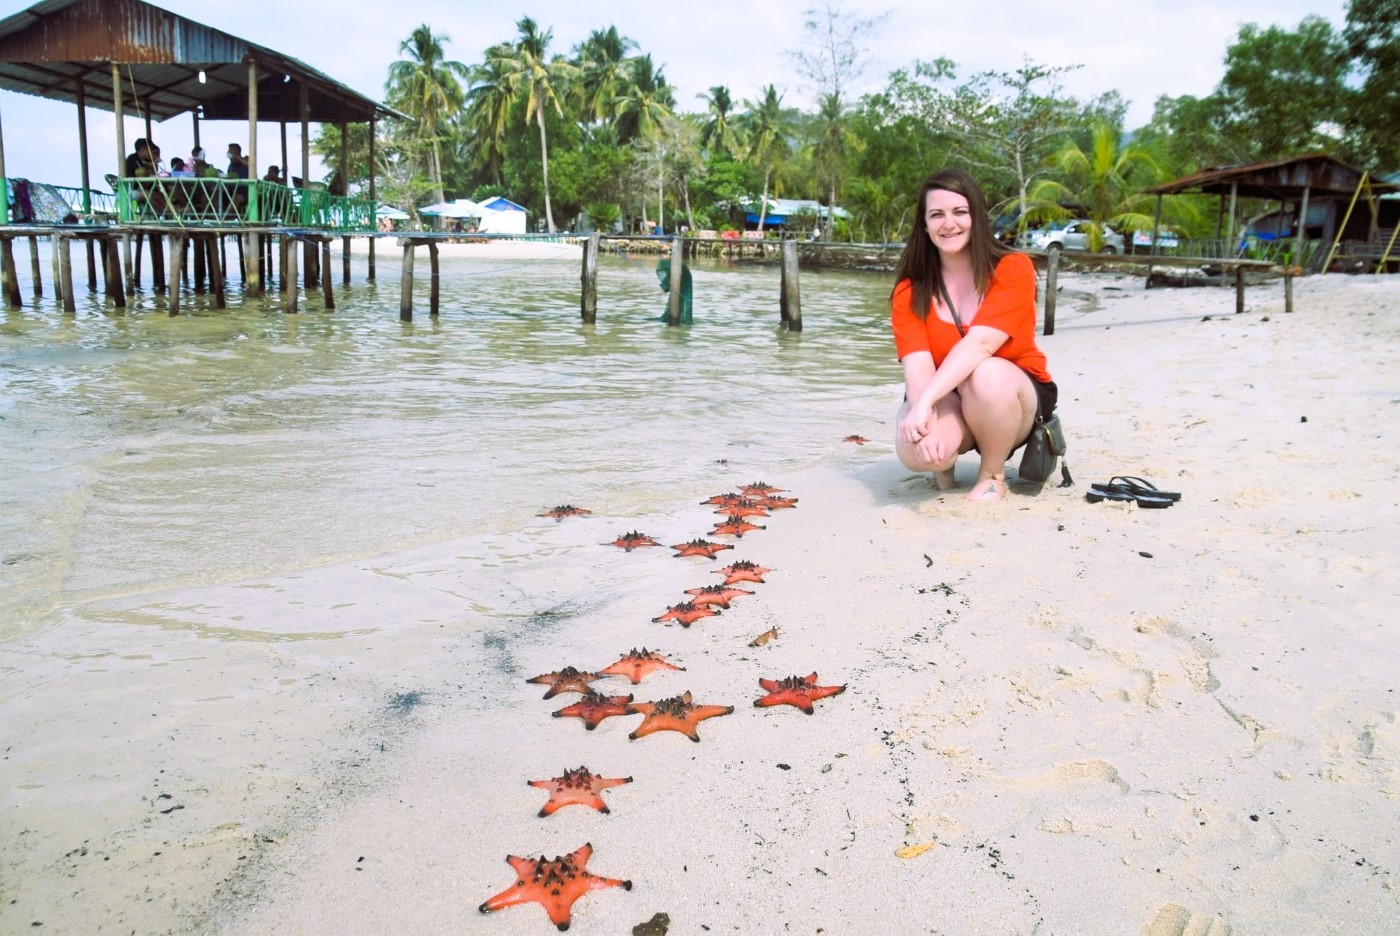 Starfish on a beach in Phu Quoc